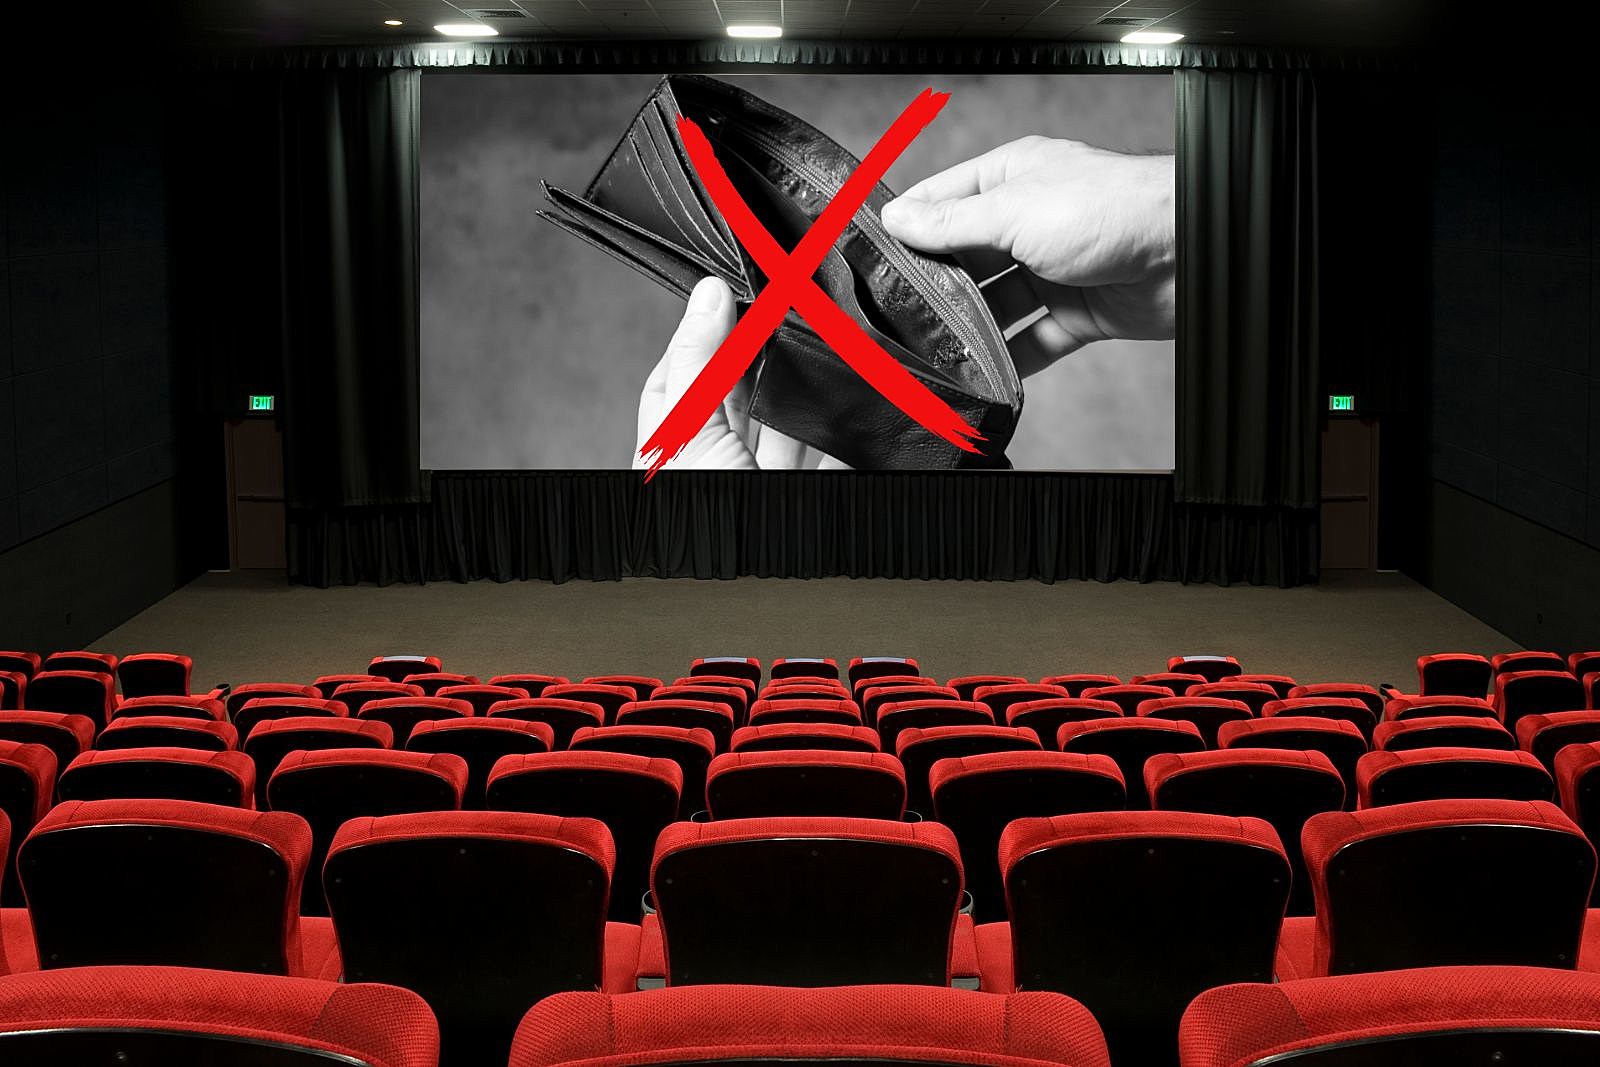 Good News, Billings! AMC Theaters Decides To NOT Charge Per Seat